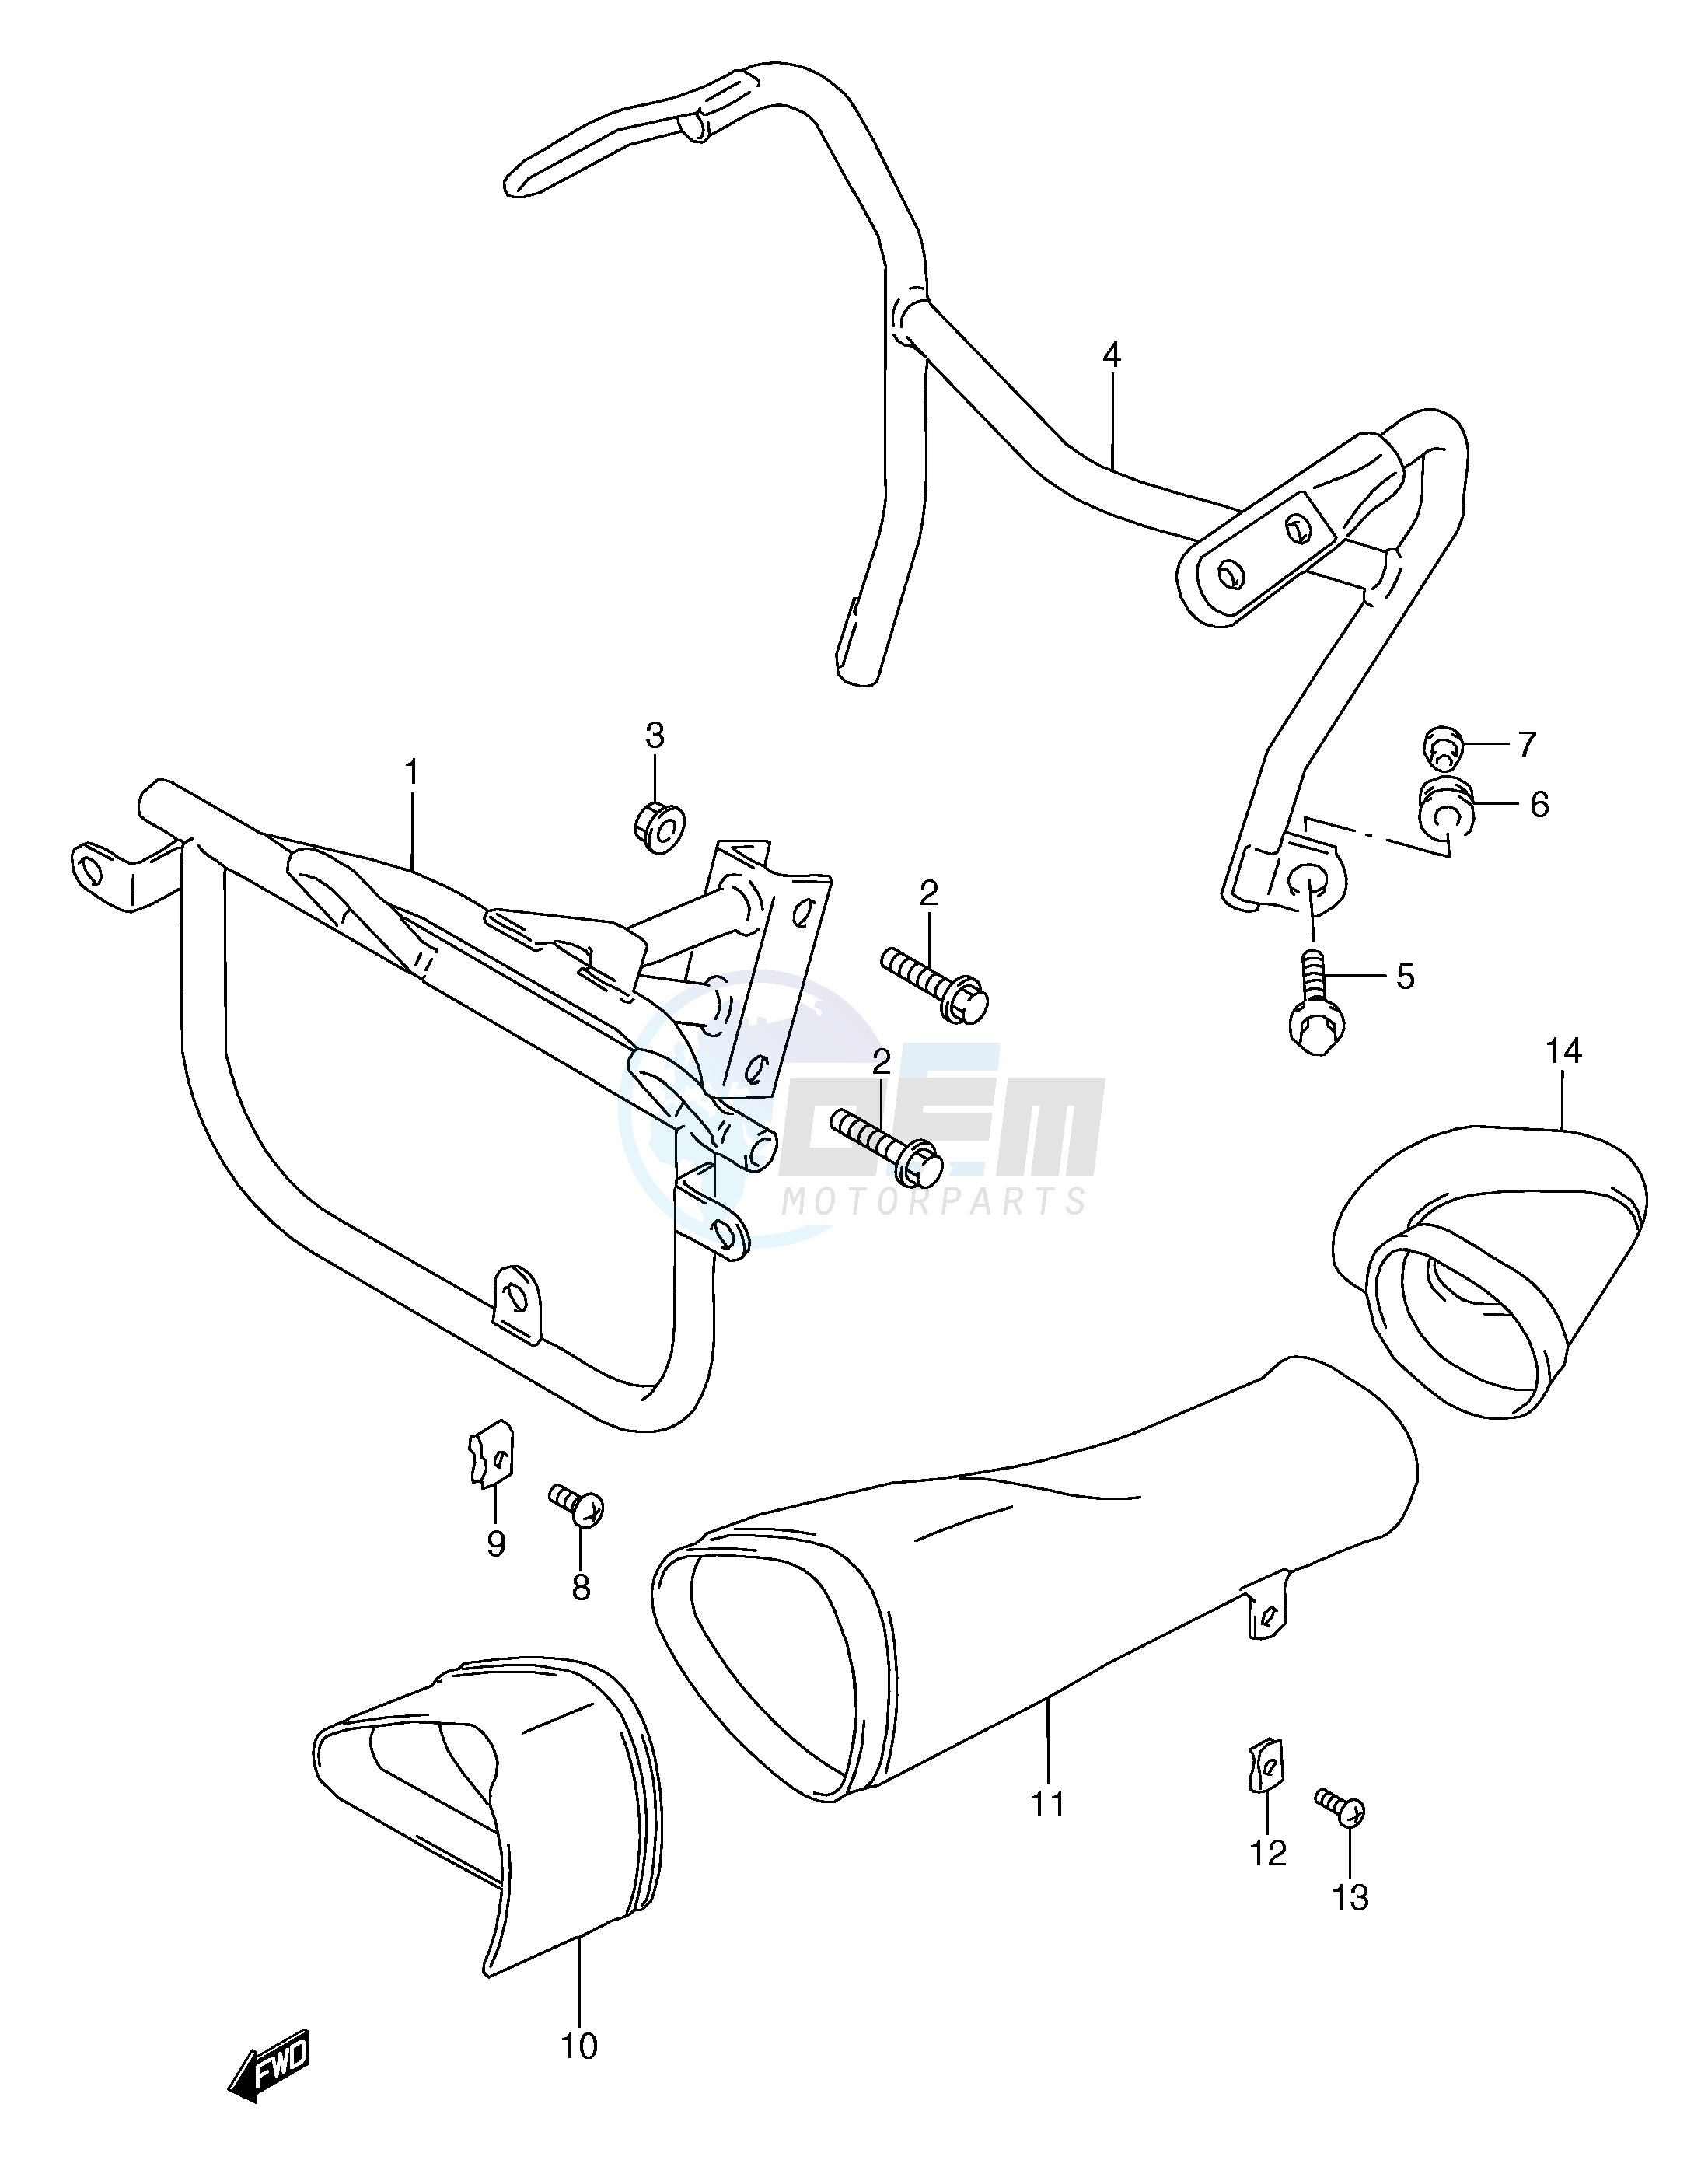 COWLING BODY INSTALLATION PARTS blueprint